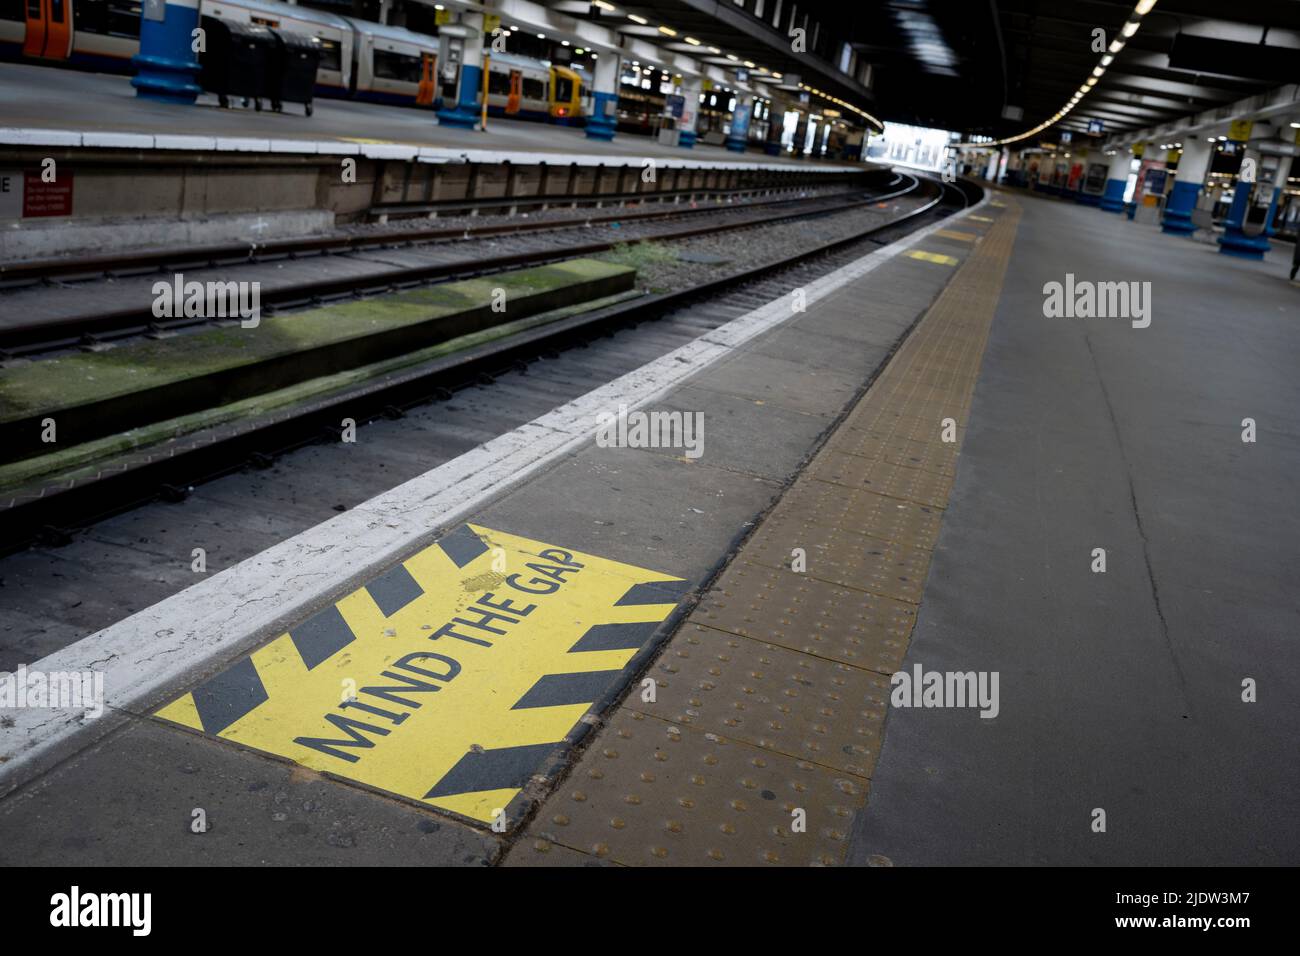 Deserted platforms at Euston Station on the second day of the UK's rail strike, when railway and London Underground workers with the RMT union have taken industrial action, the most disruptive rail strike across England, Scotland and Wales for thirty years, on 23rd June 2022, in London, England. Stock Photo